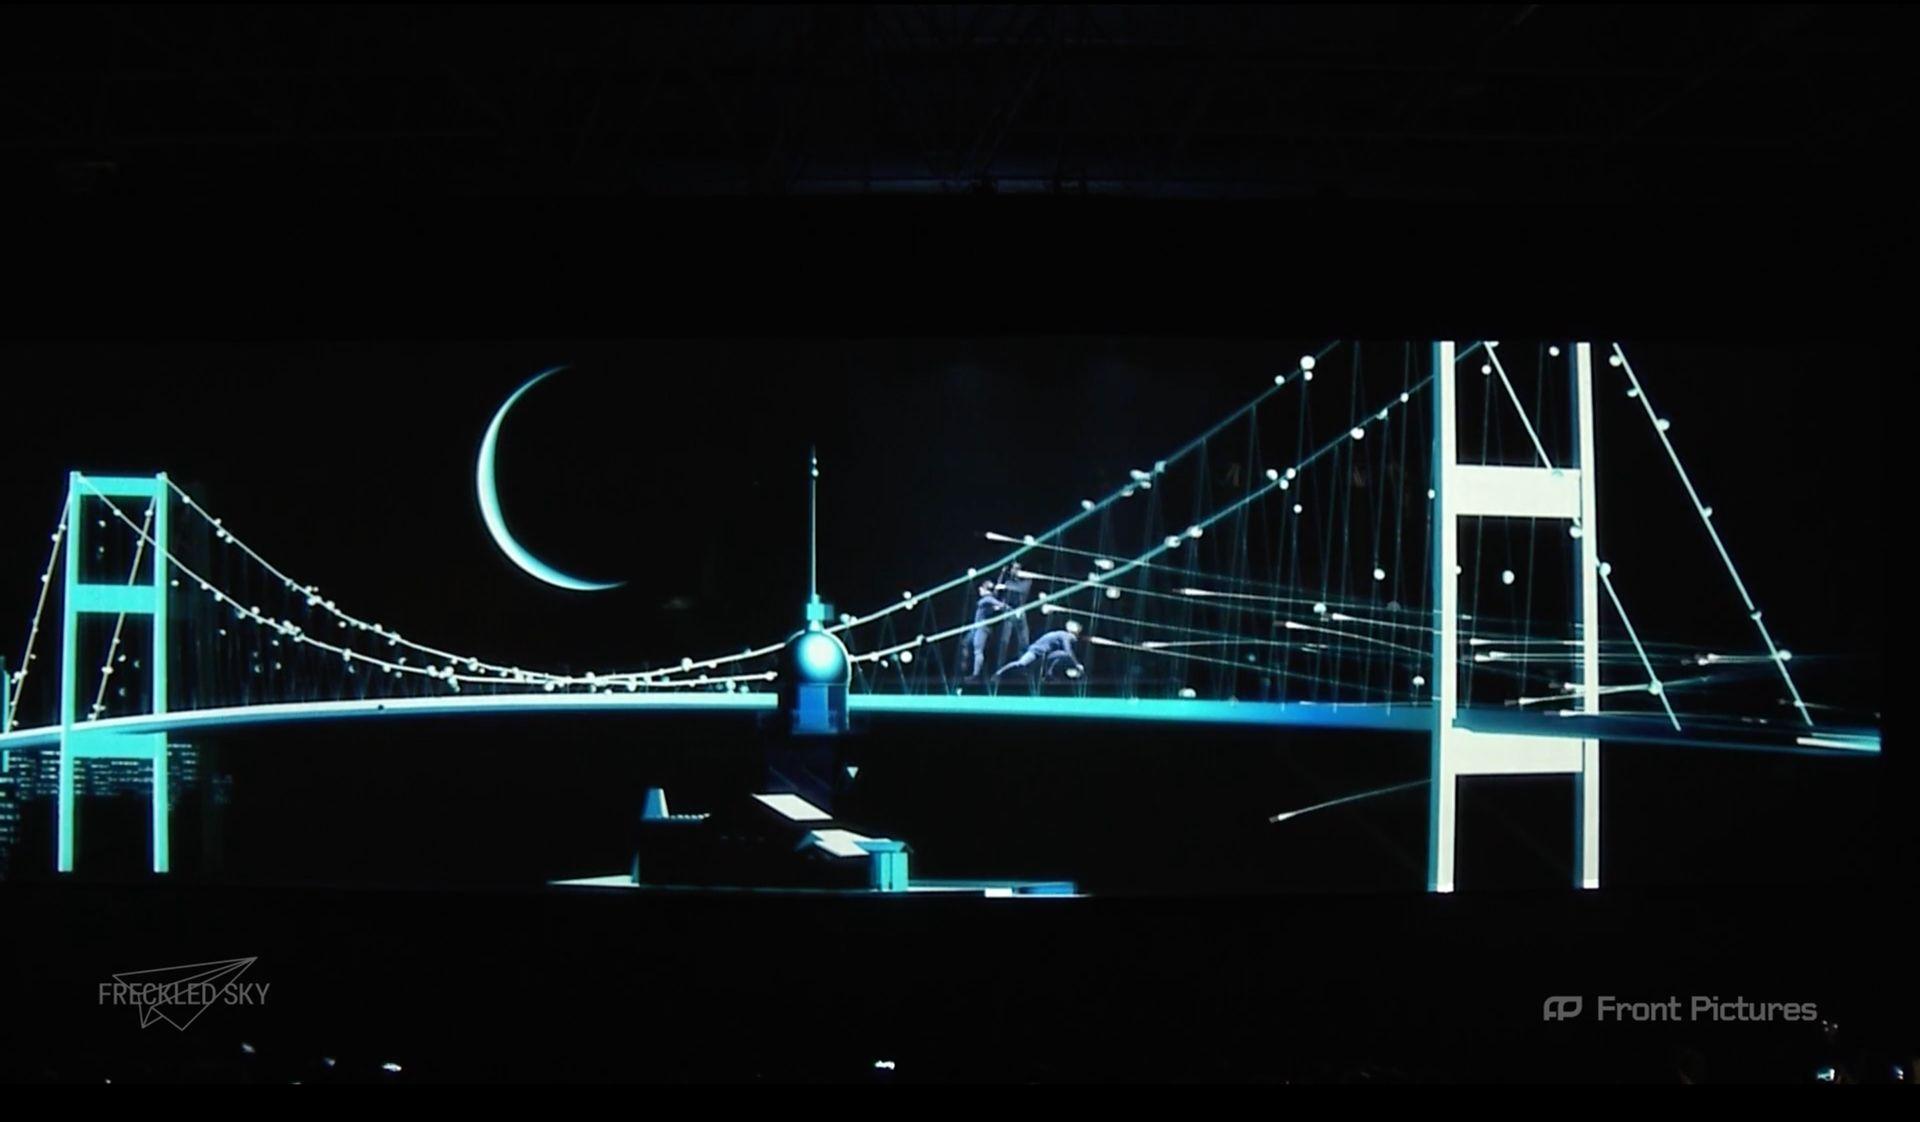 Screenberry-driven visuals on a giant 48x8m projection scrim as part of the spectacular Mercedes-Benz Travego bus reveal show